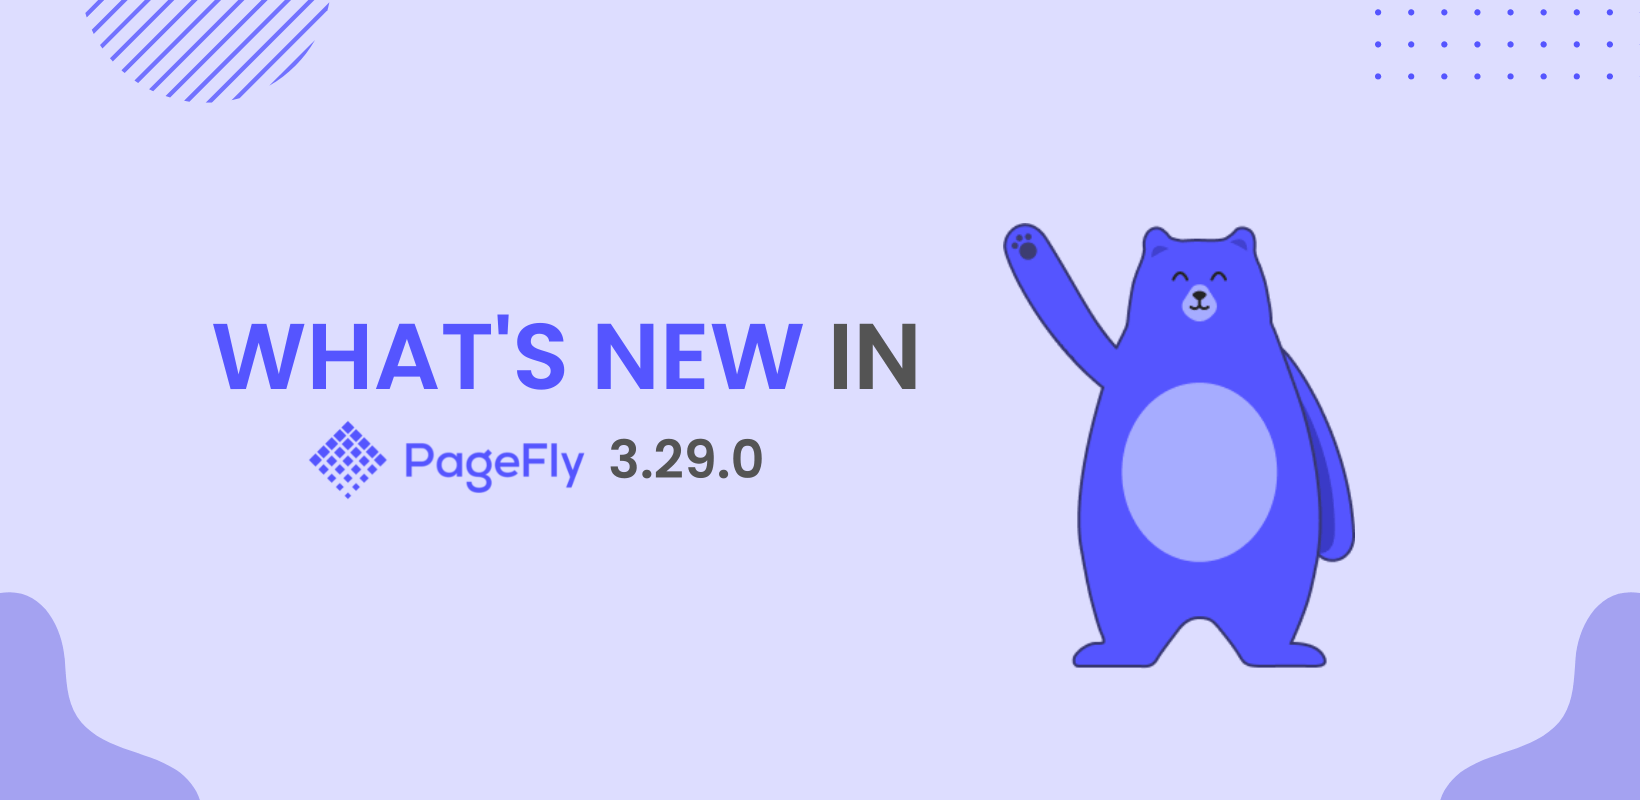 PageFly 3.29.0: Free Services, AiTrillion, Recurpay and Track123 Integration